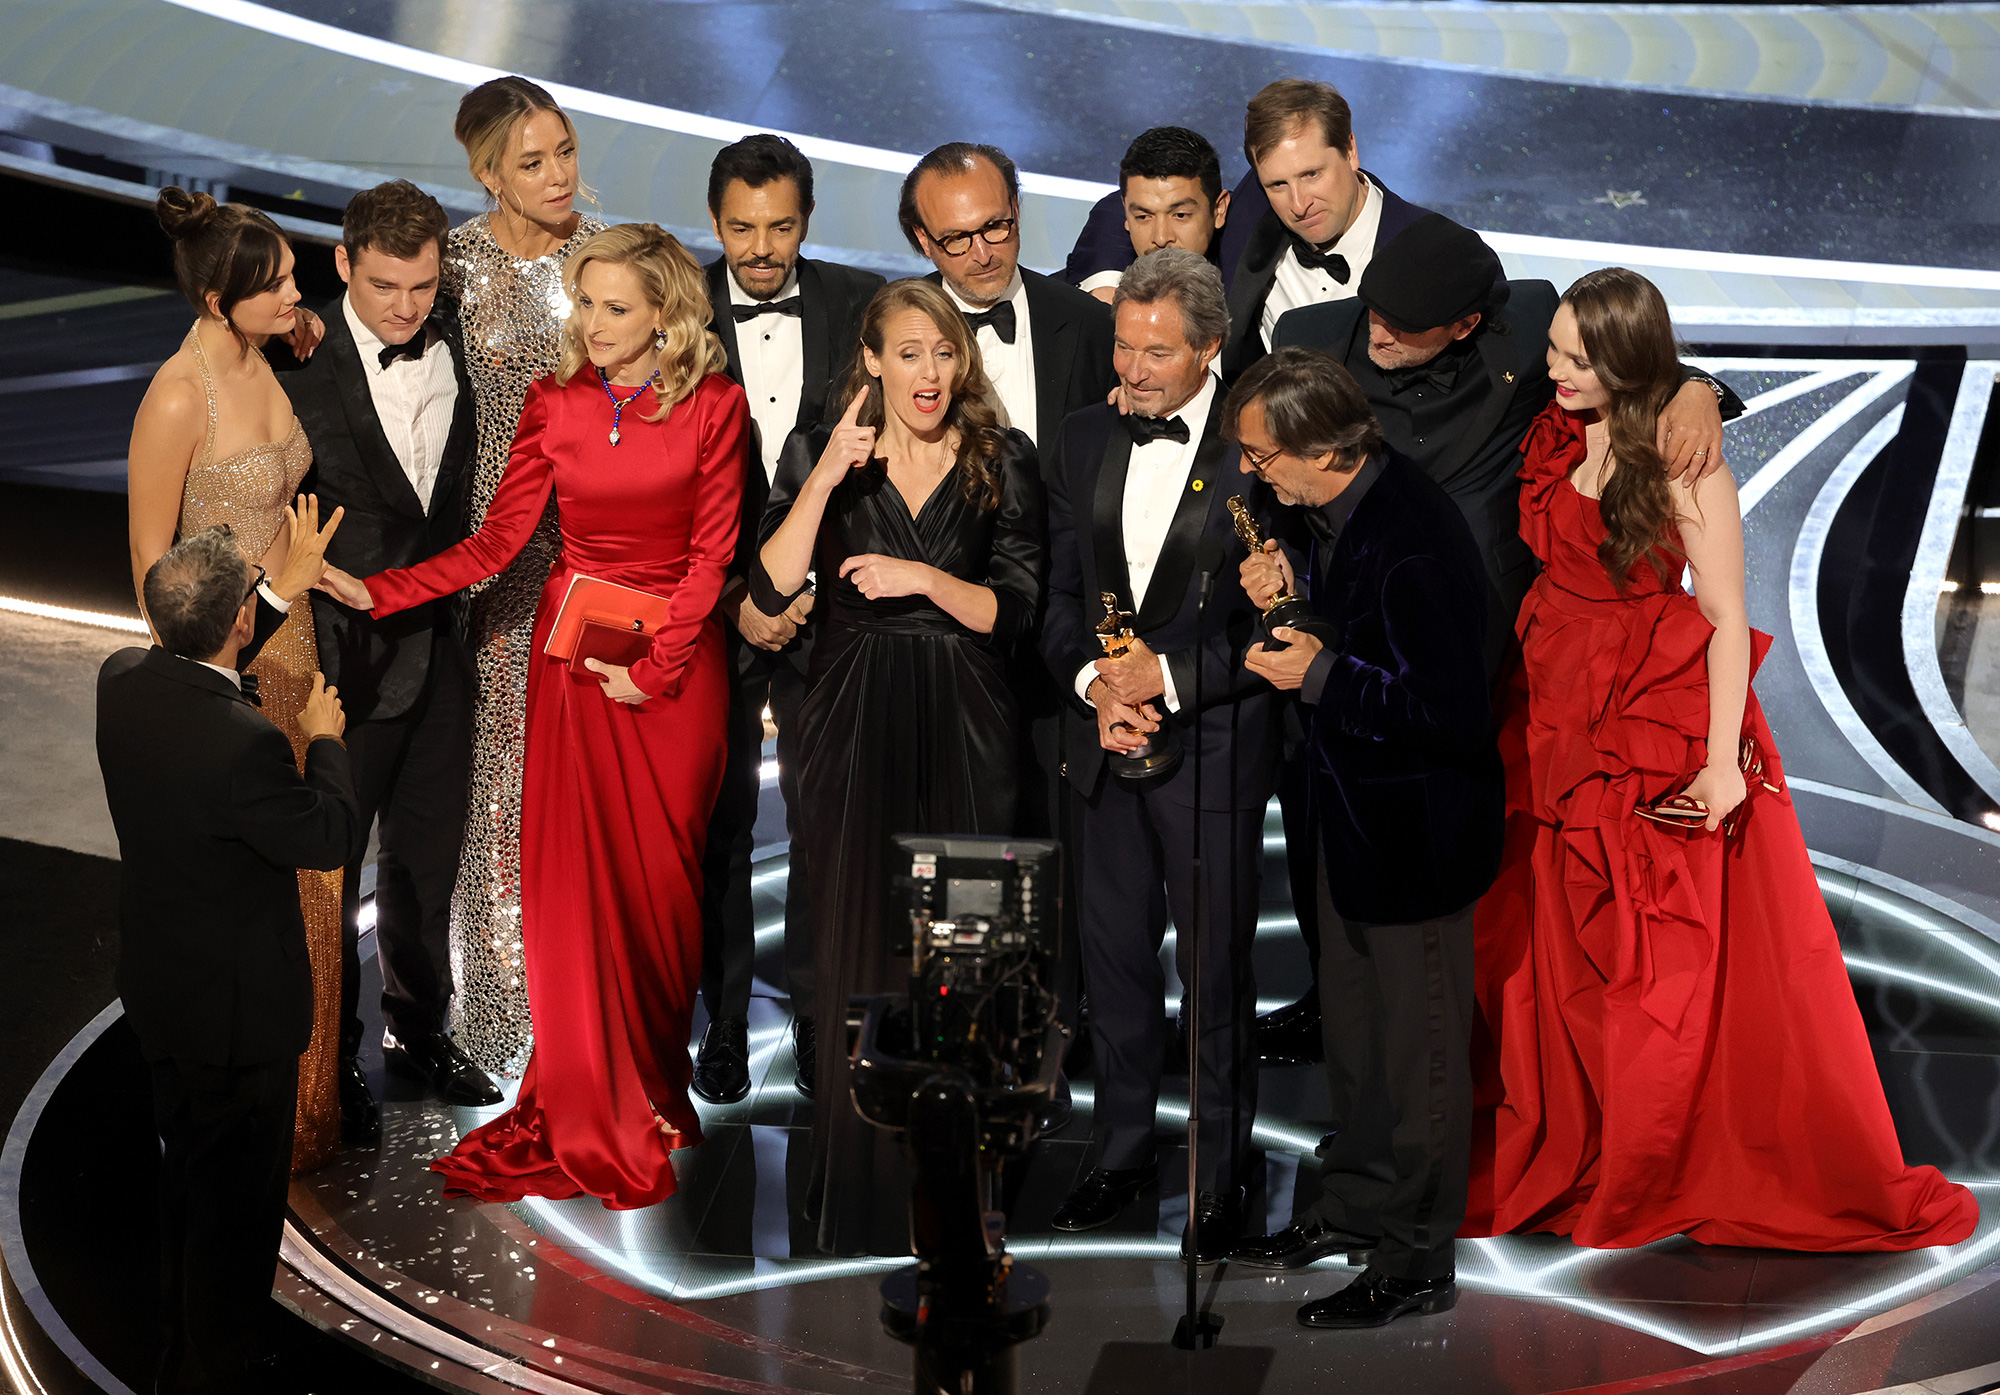 The cast and crew of "Coda" accept the best picture award onstage during the 94th Annual Academy Awards.